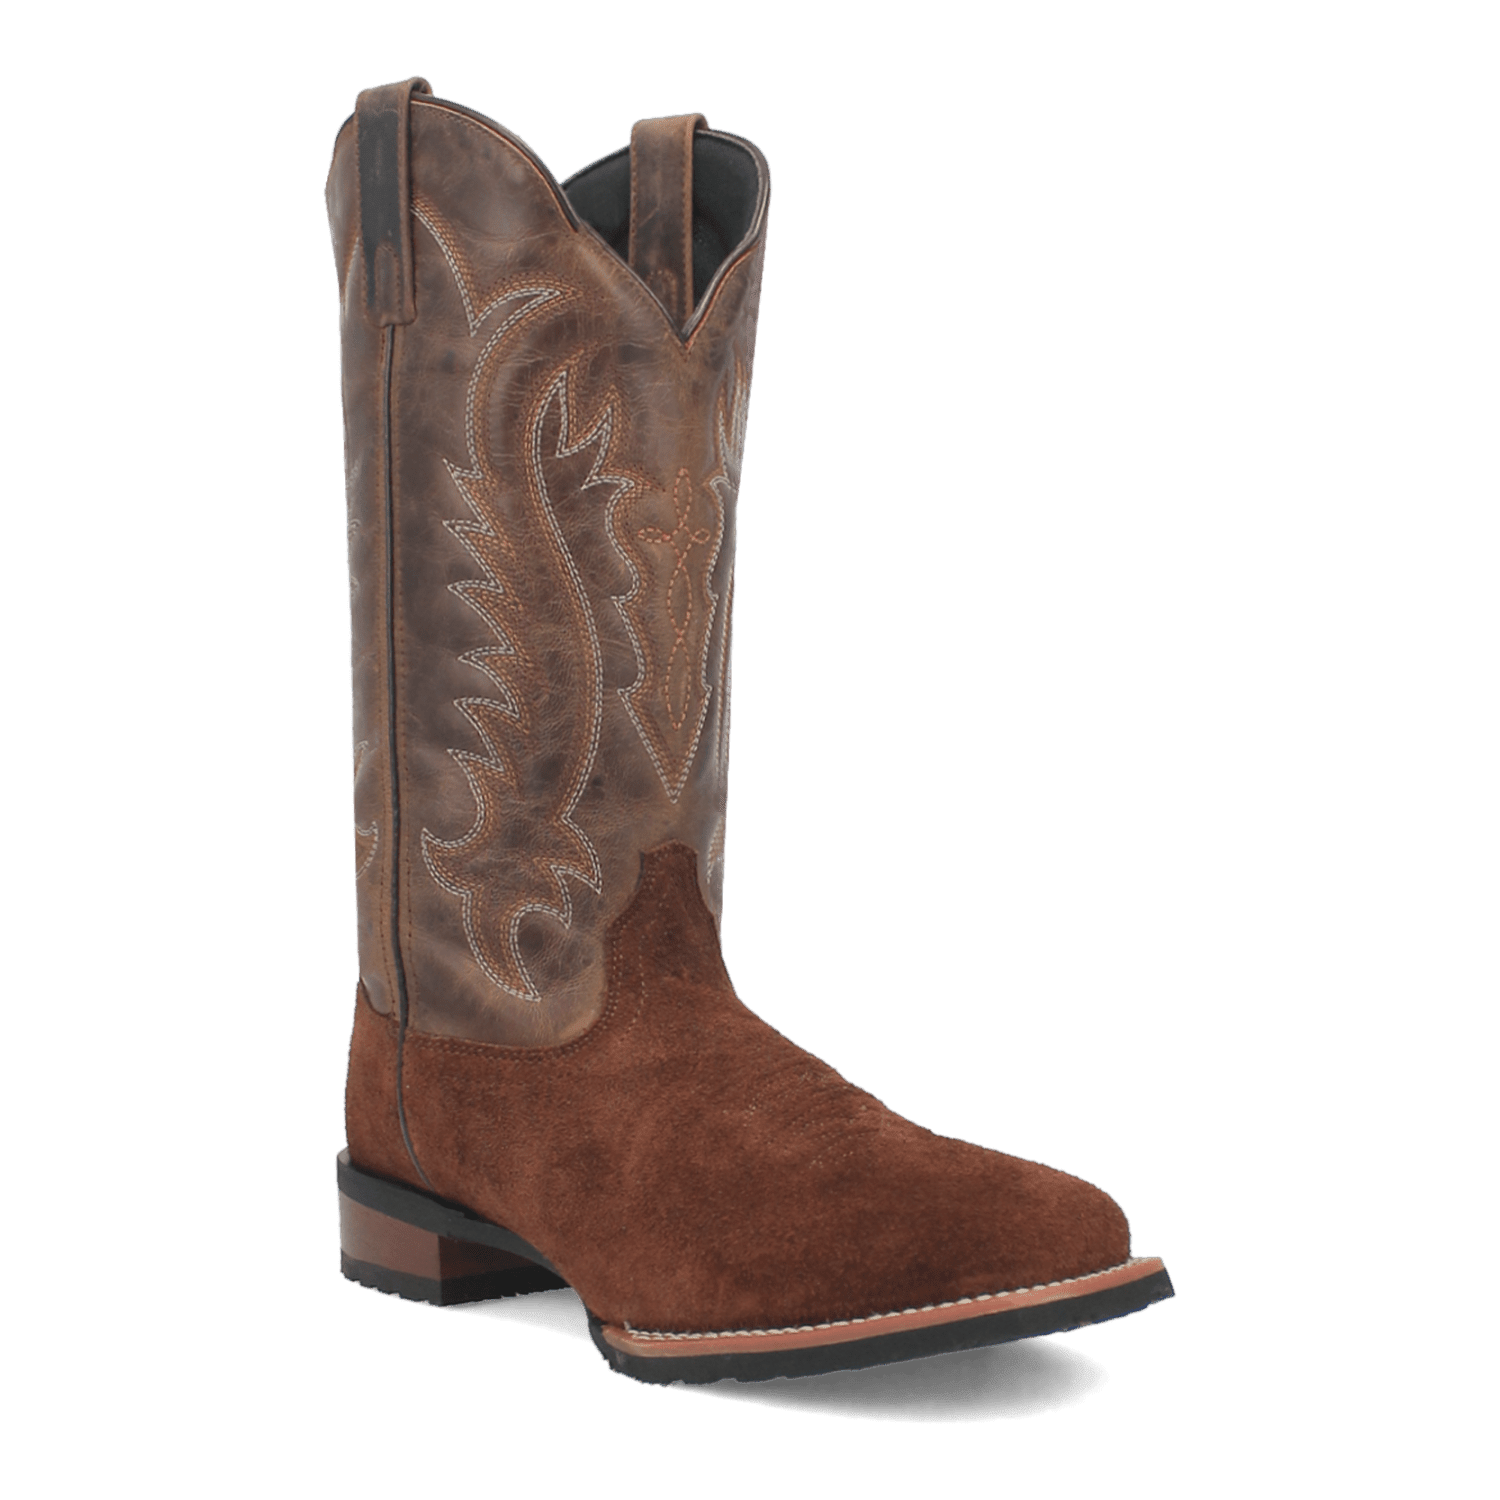 RIGID LEATHER BOOT Cover